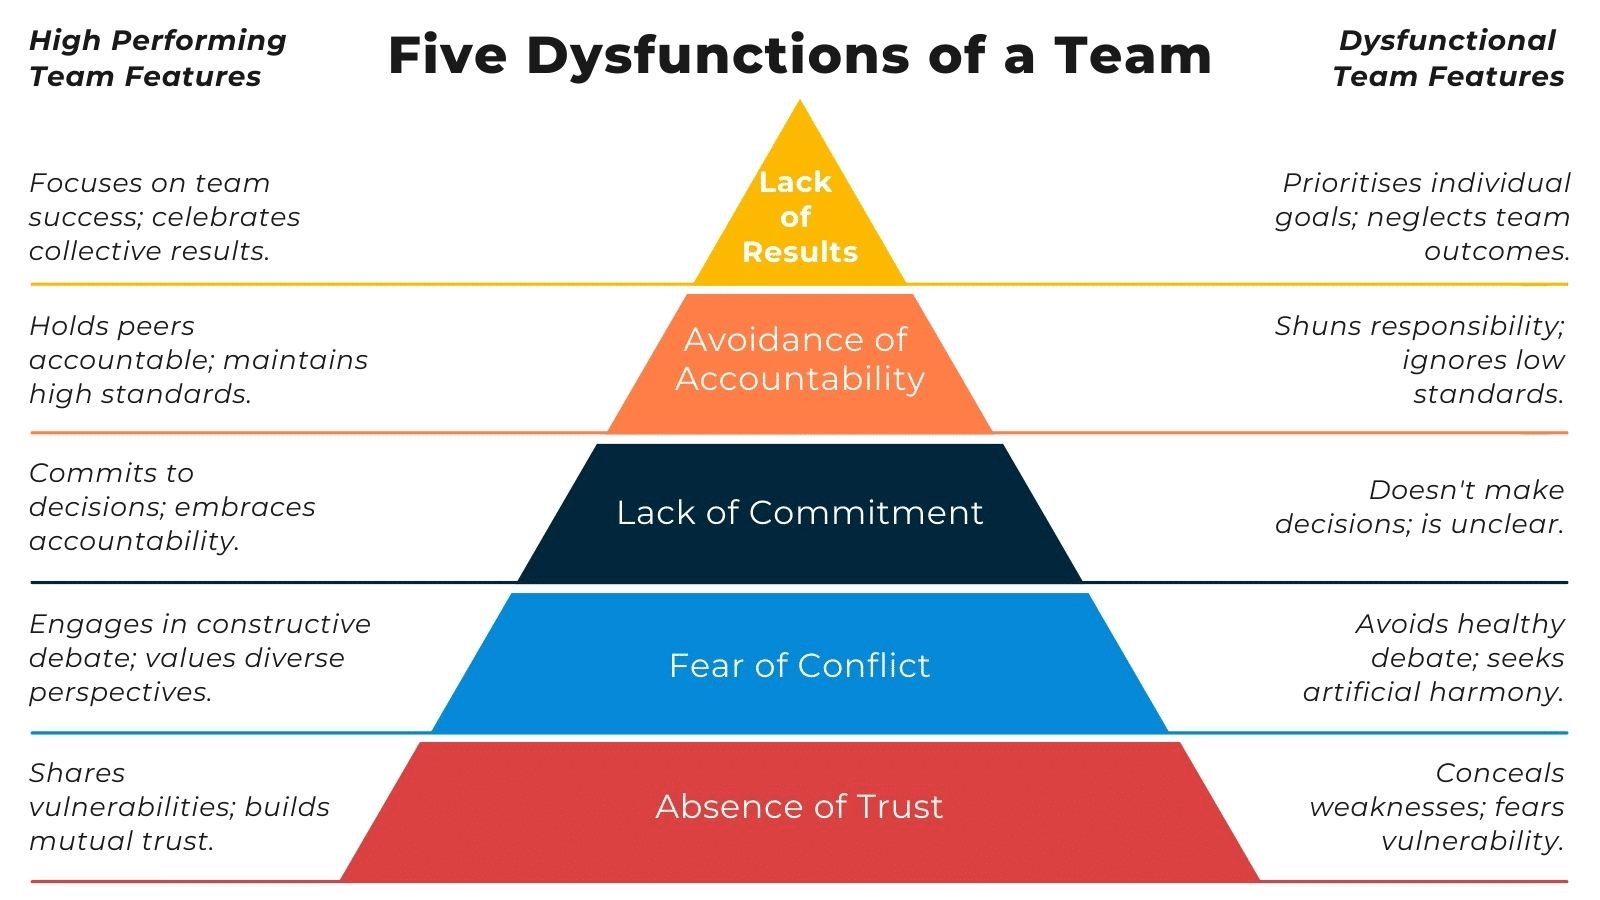 The 5 Dysfunctions of a Team Pyramid showing the features of a high performance team versus a dyfunctional team